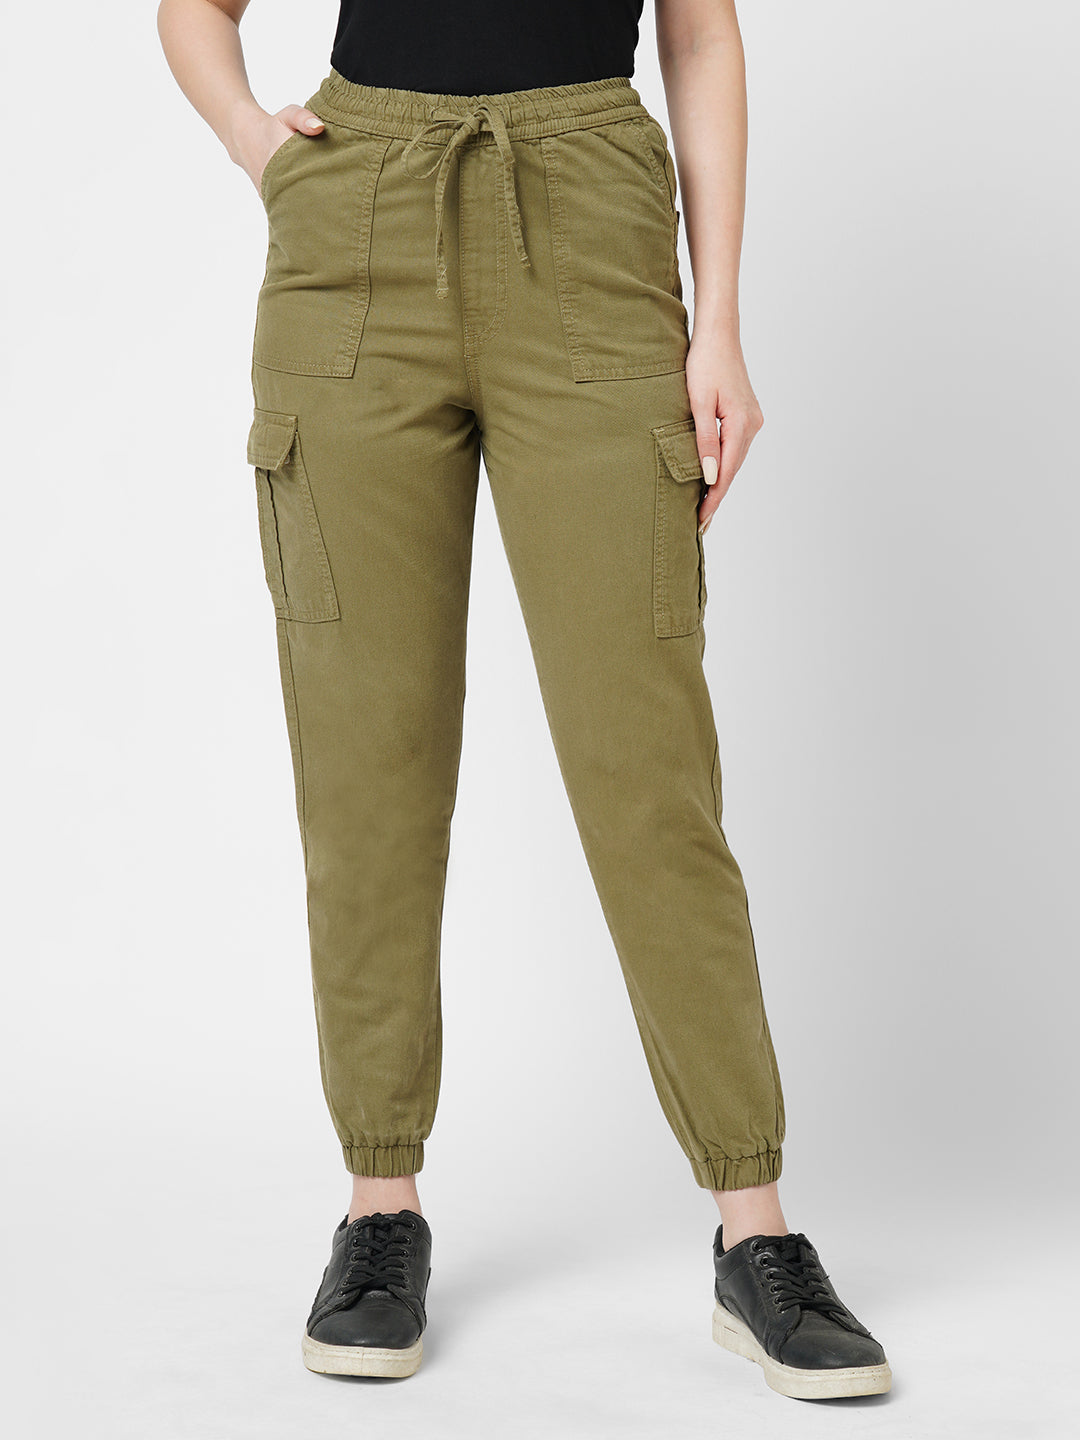 Rest Later Pants - Army Green - Rise